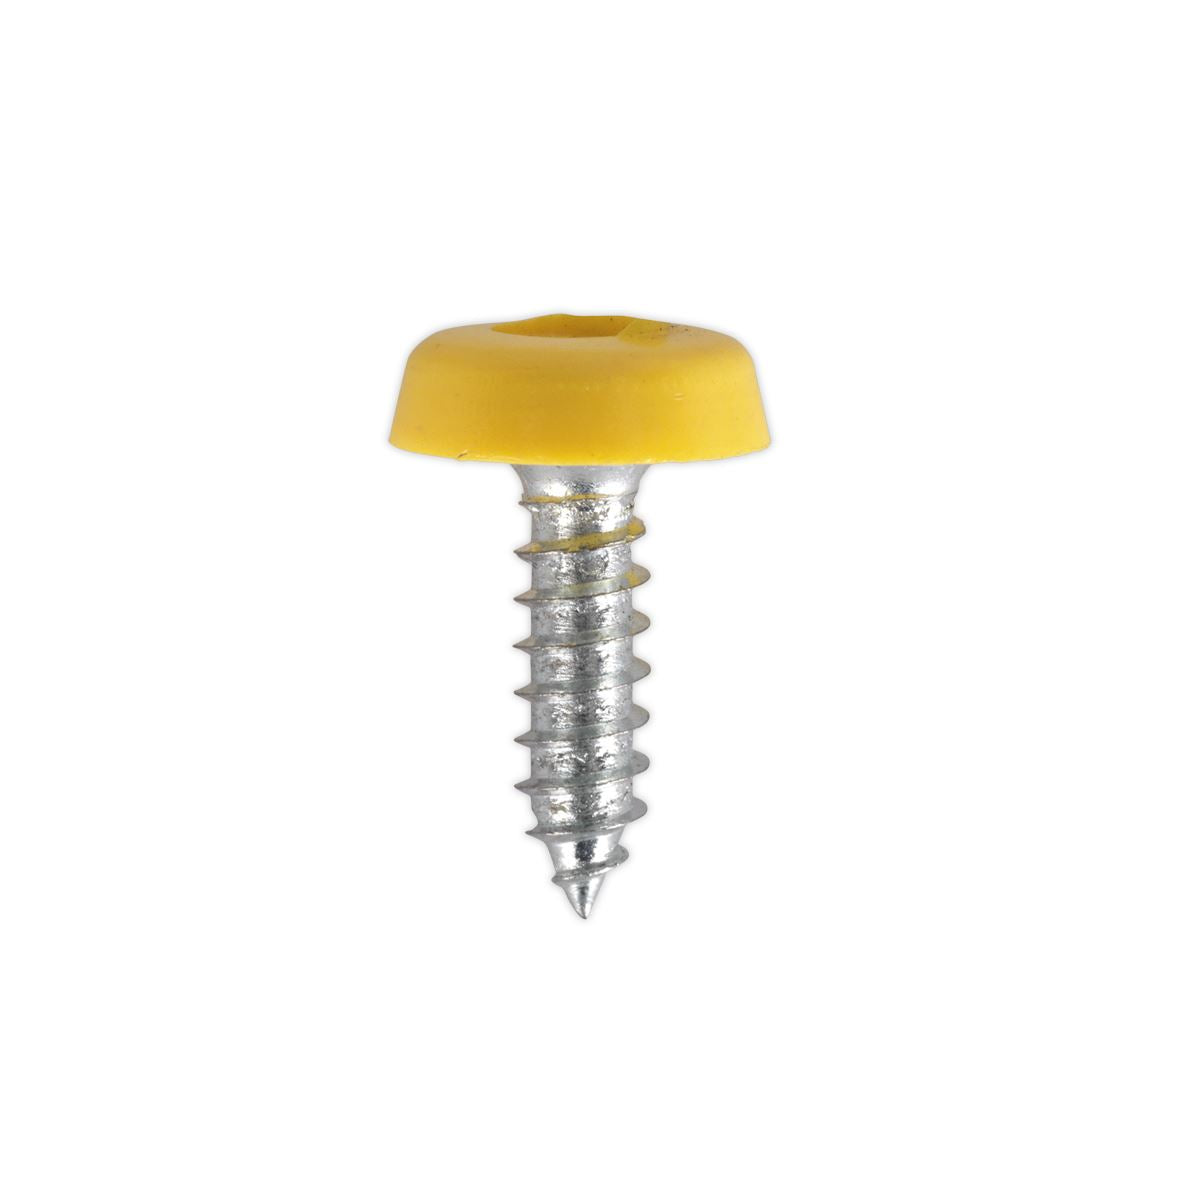 Sealey Numberplate Screw Plastic Enclosed Head 4.8 x 18mm Yellow Pack of 50